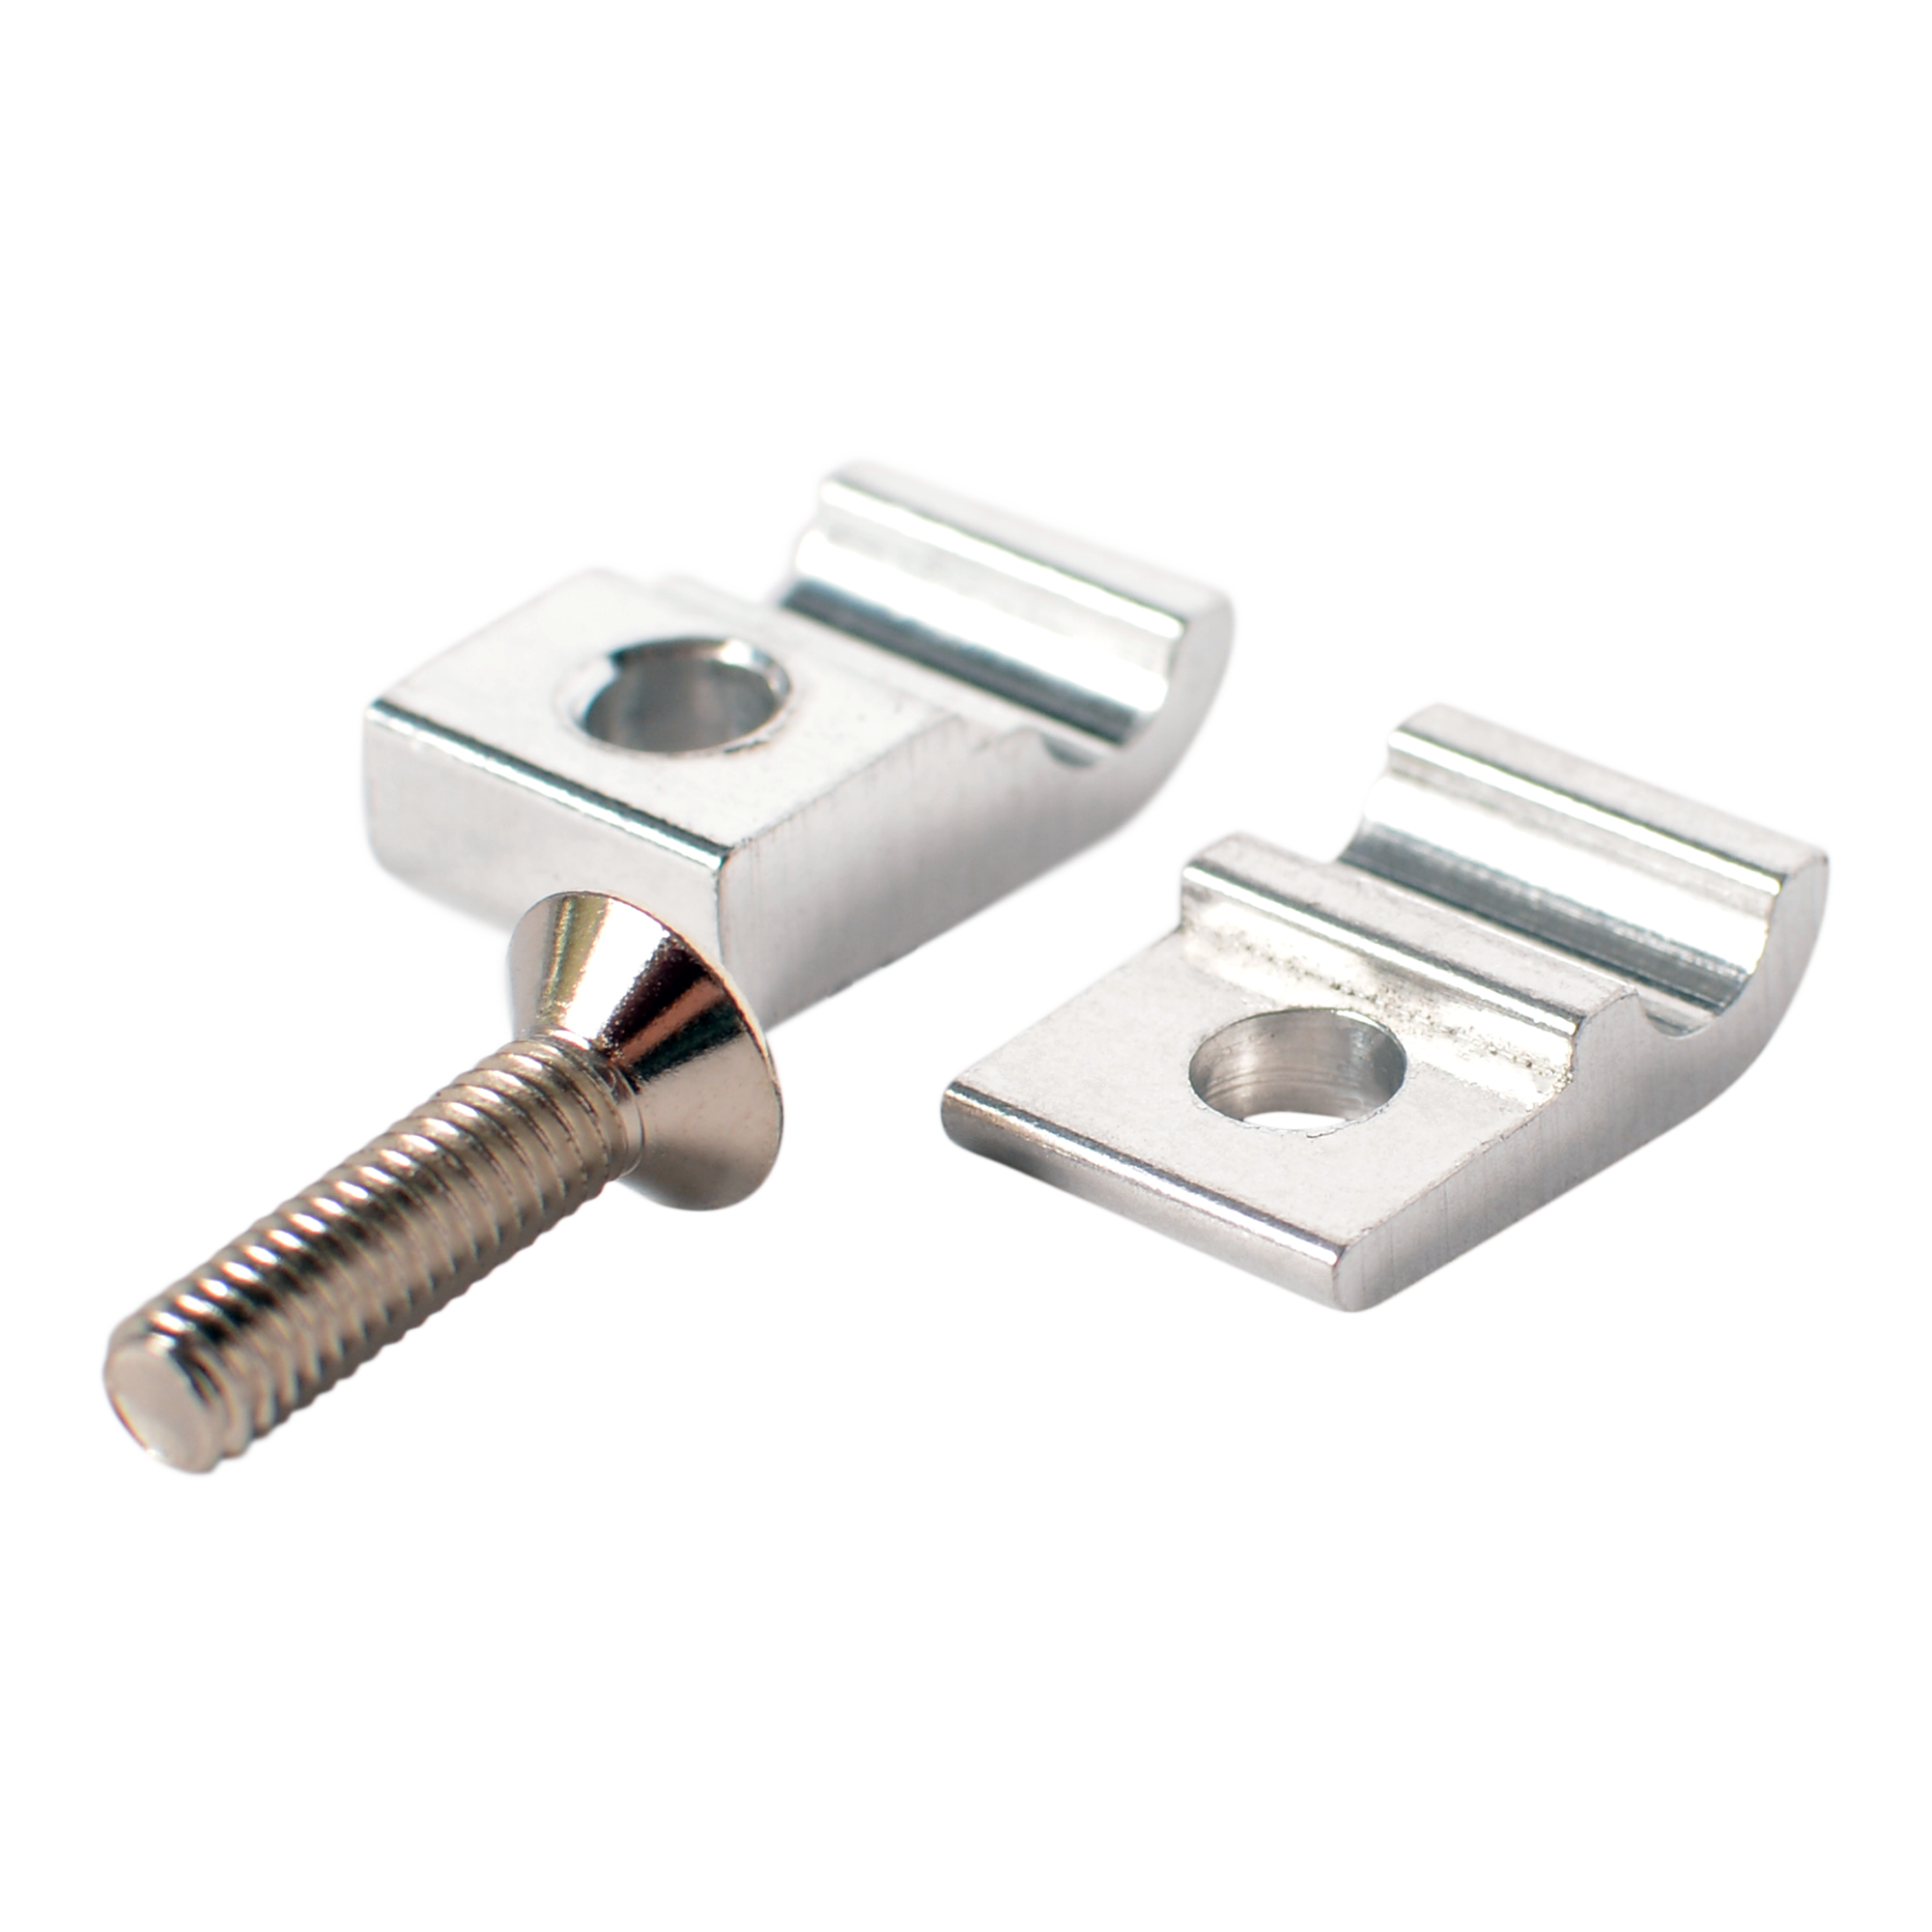 Allstar 18321 Line Clamp 2 Piece 1/4in ID Aluminum Polished Set of 4 